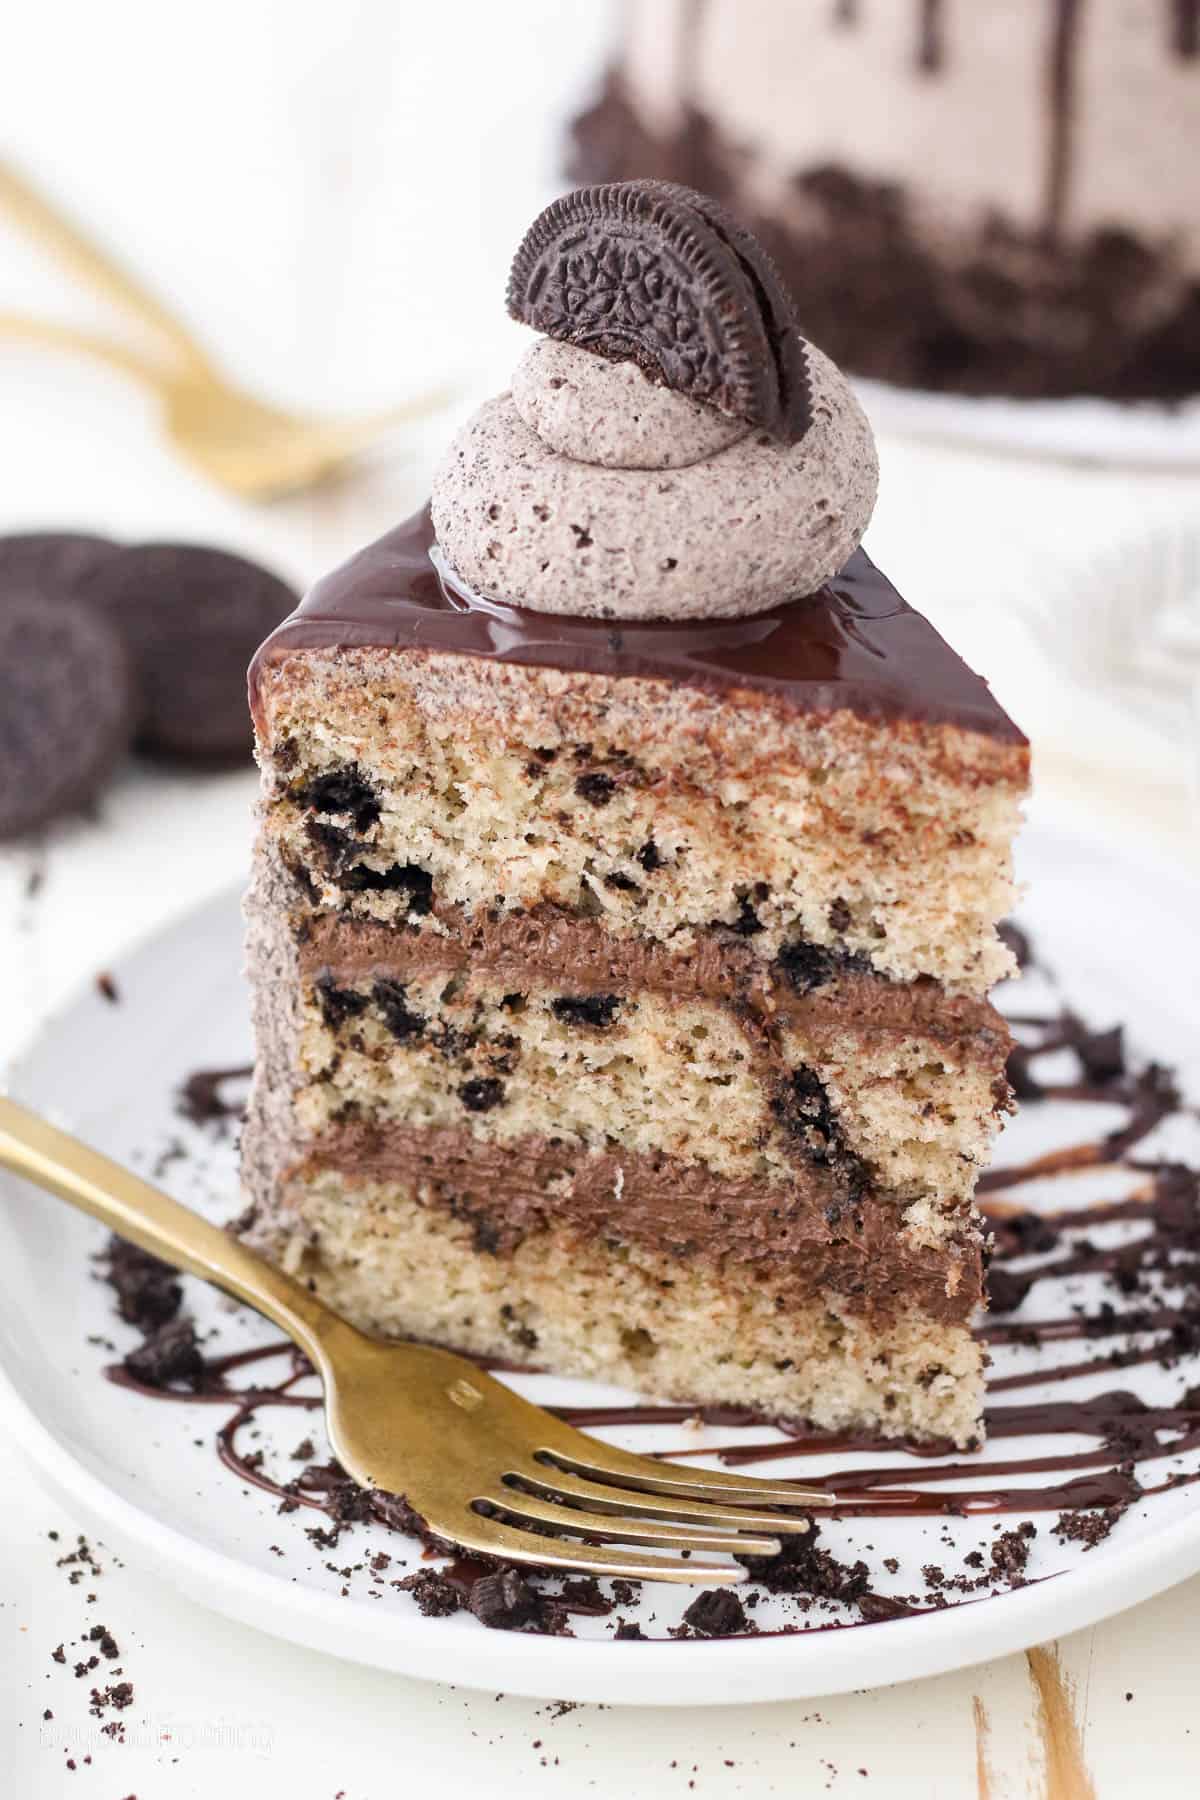 A slice of frosted Oreo cookies and cream cake on a plate next to a fork.